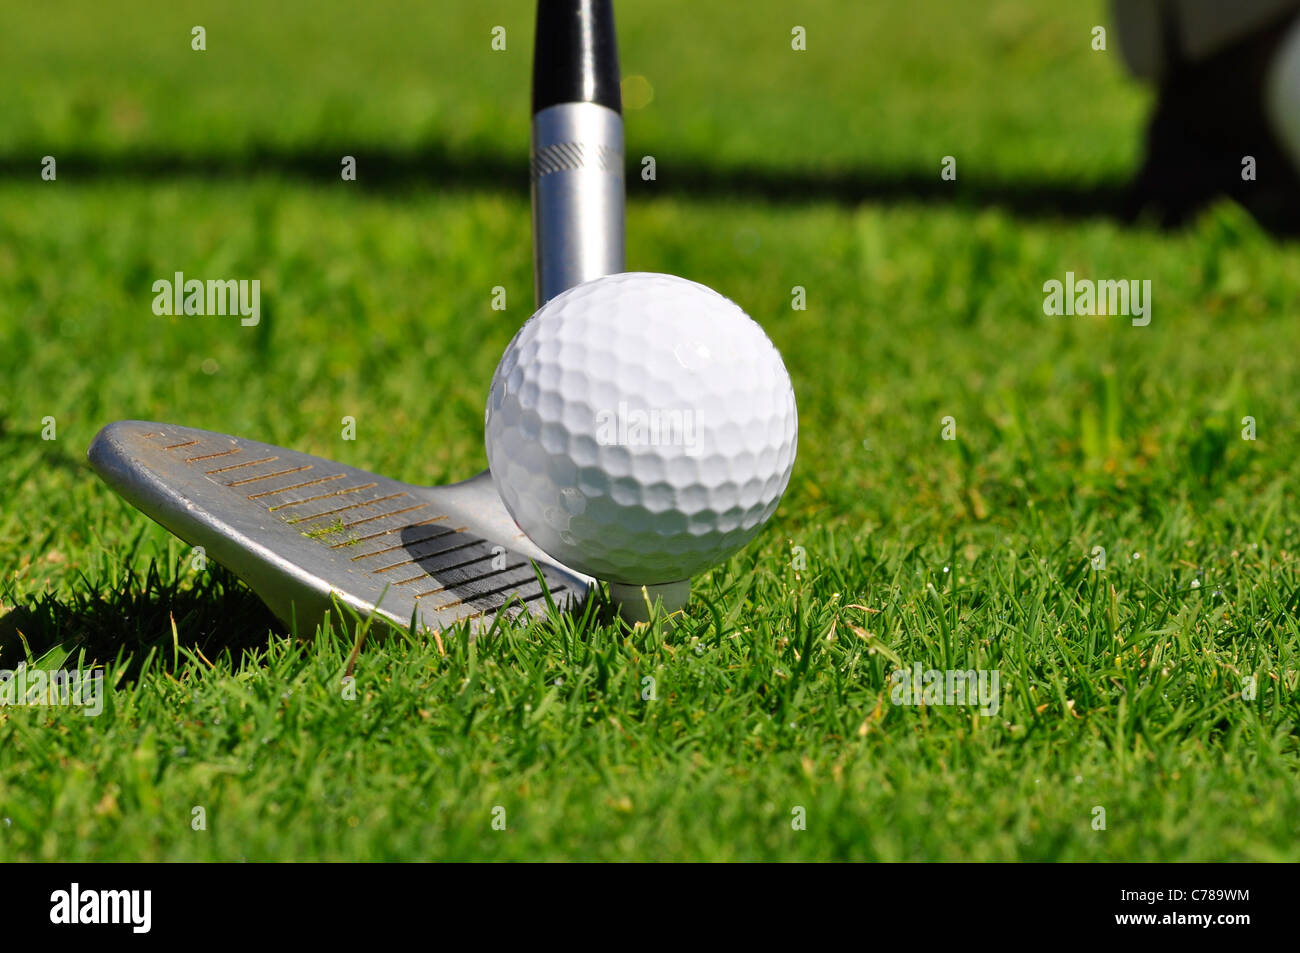 Golf ball and driver, ready to strike, on a real golf course. Stock Photo